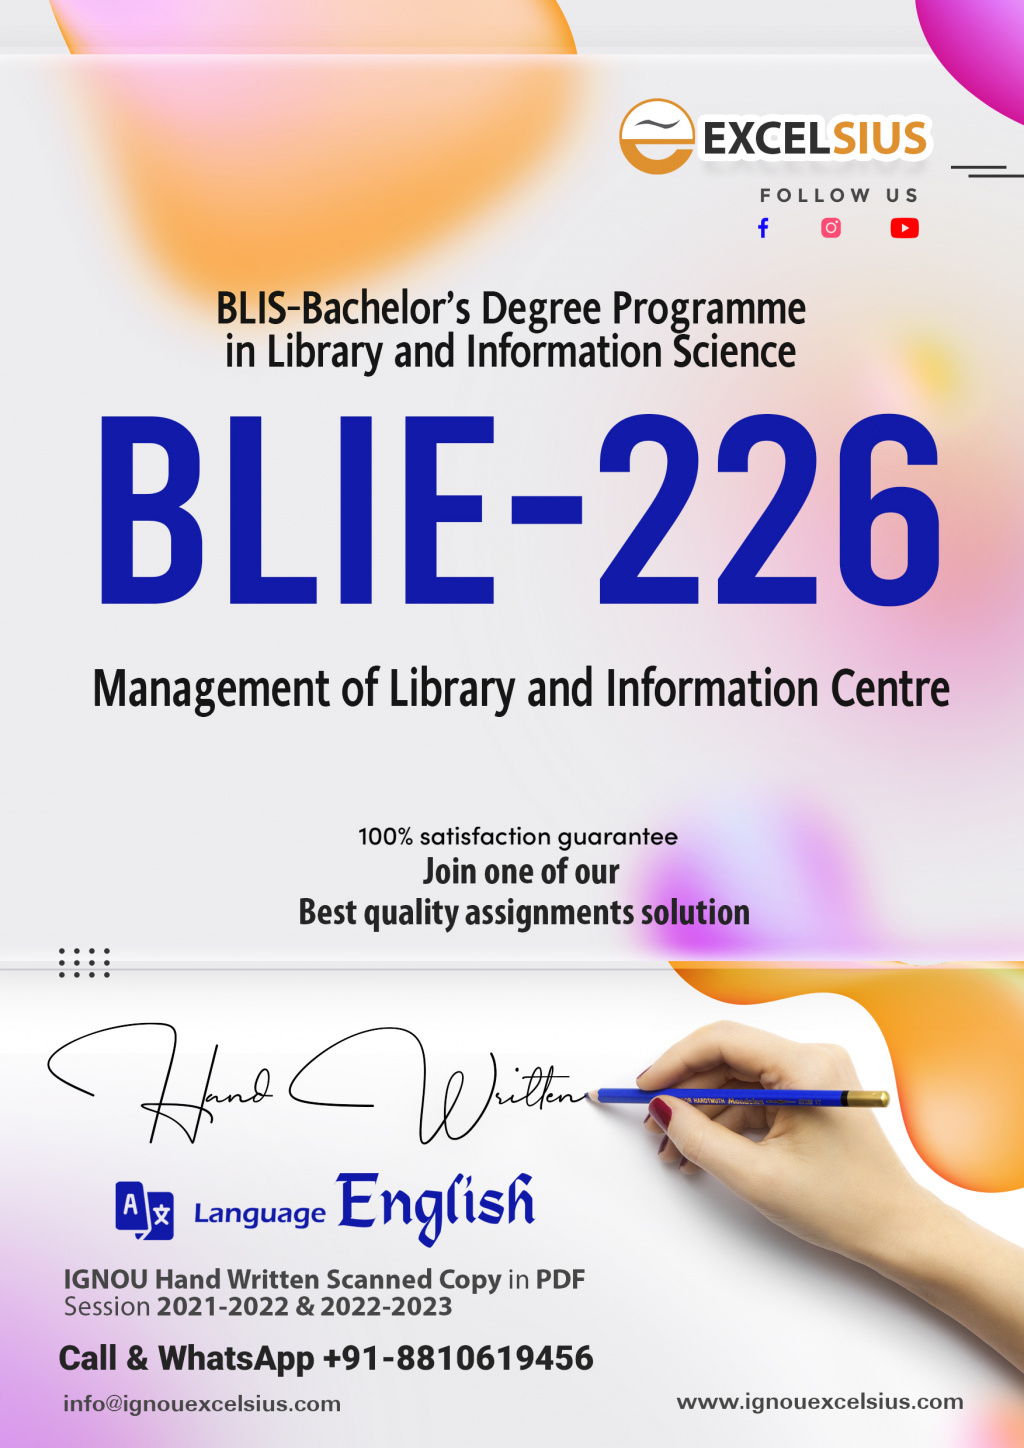 IGNOU BLIE-226 - Management of Library and Information Centre, Latest Solved Assignment -July 2022 – January 2023